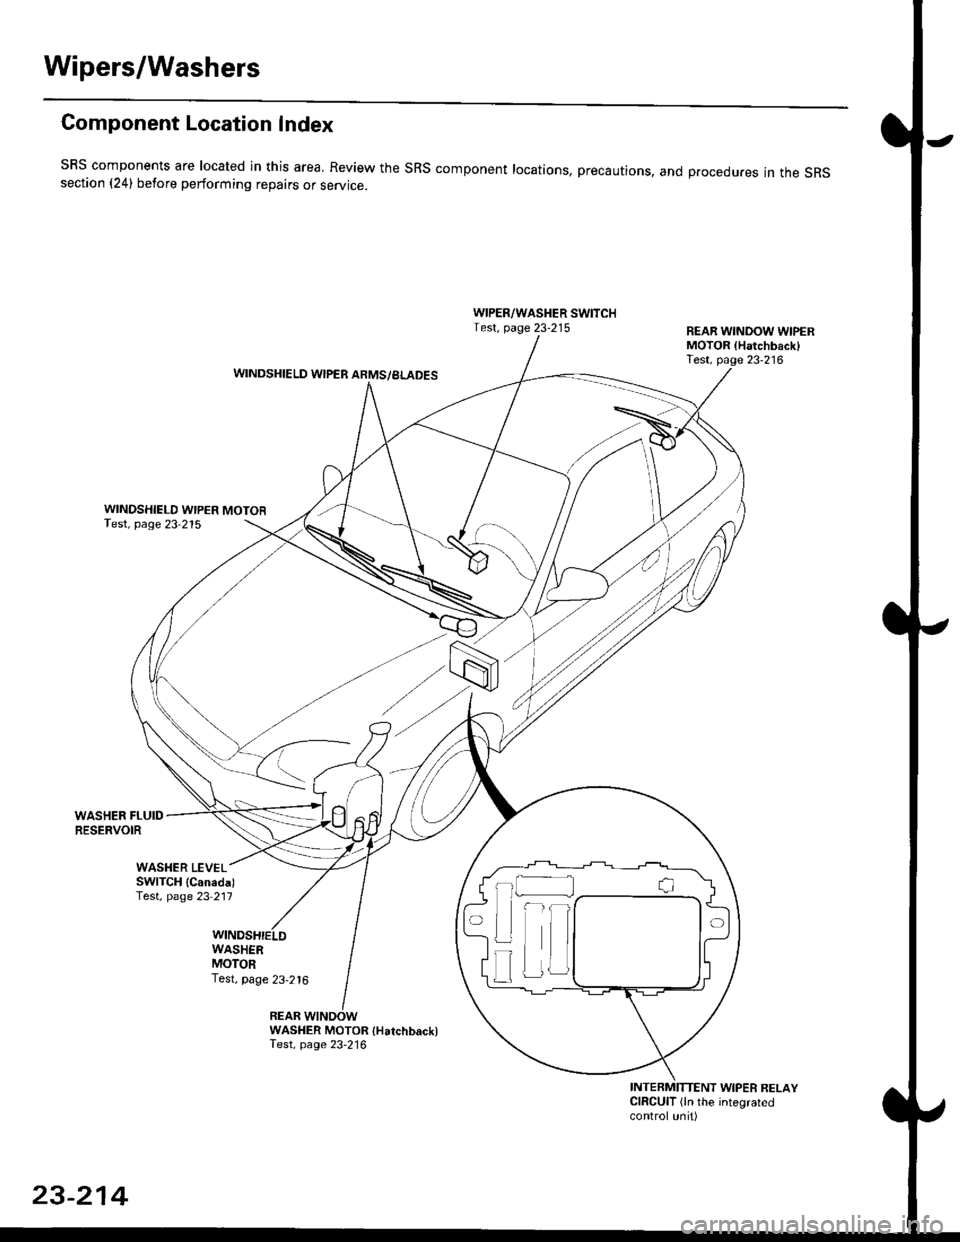 HONDA CIVIC 2000 6.G Workshop Manual Wipers/Washers
Component Location Index
SBS components are located in this area, Review the SRS component locations, precautions, and procedures in the SRSsection (241 betore performing repairs or ser